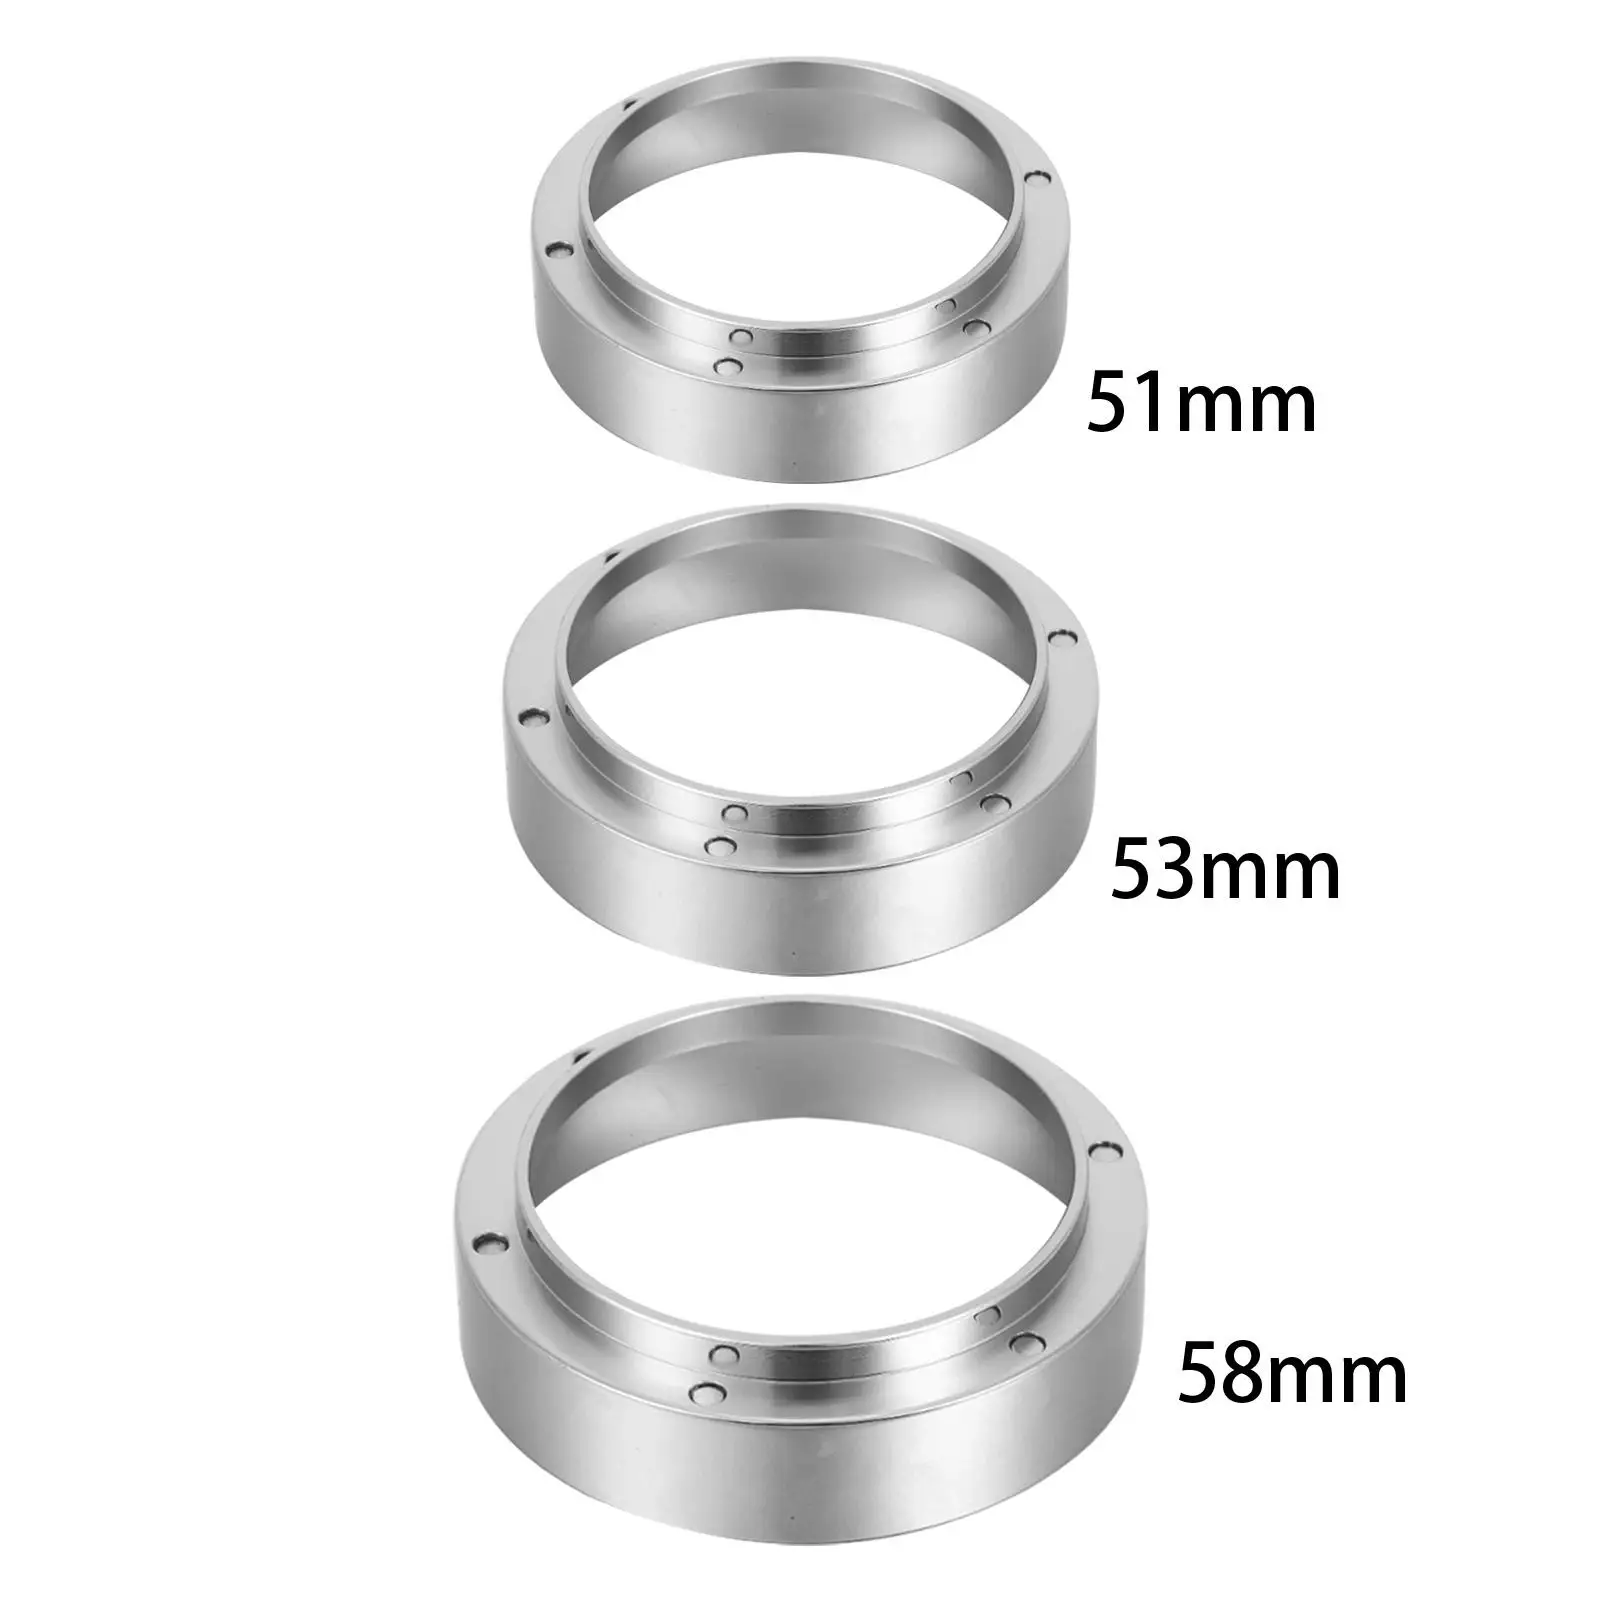 Replacement Espresso Dosing Funnel Practical Coffee Dosing Rings for Brewing Bowl Coffee Powder Espresso Machine Accessories